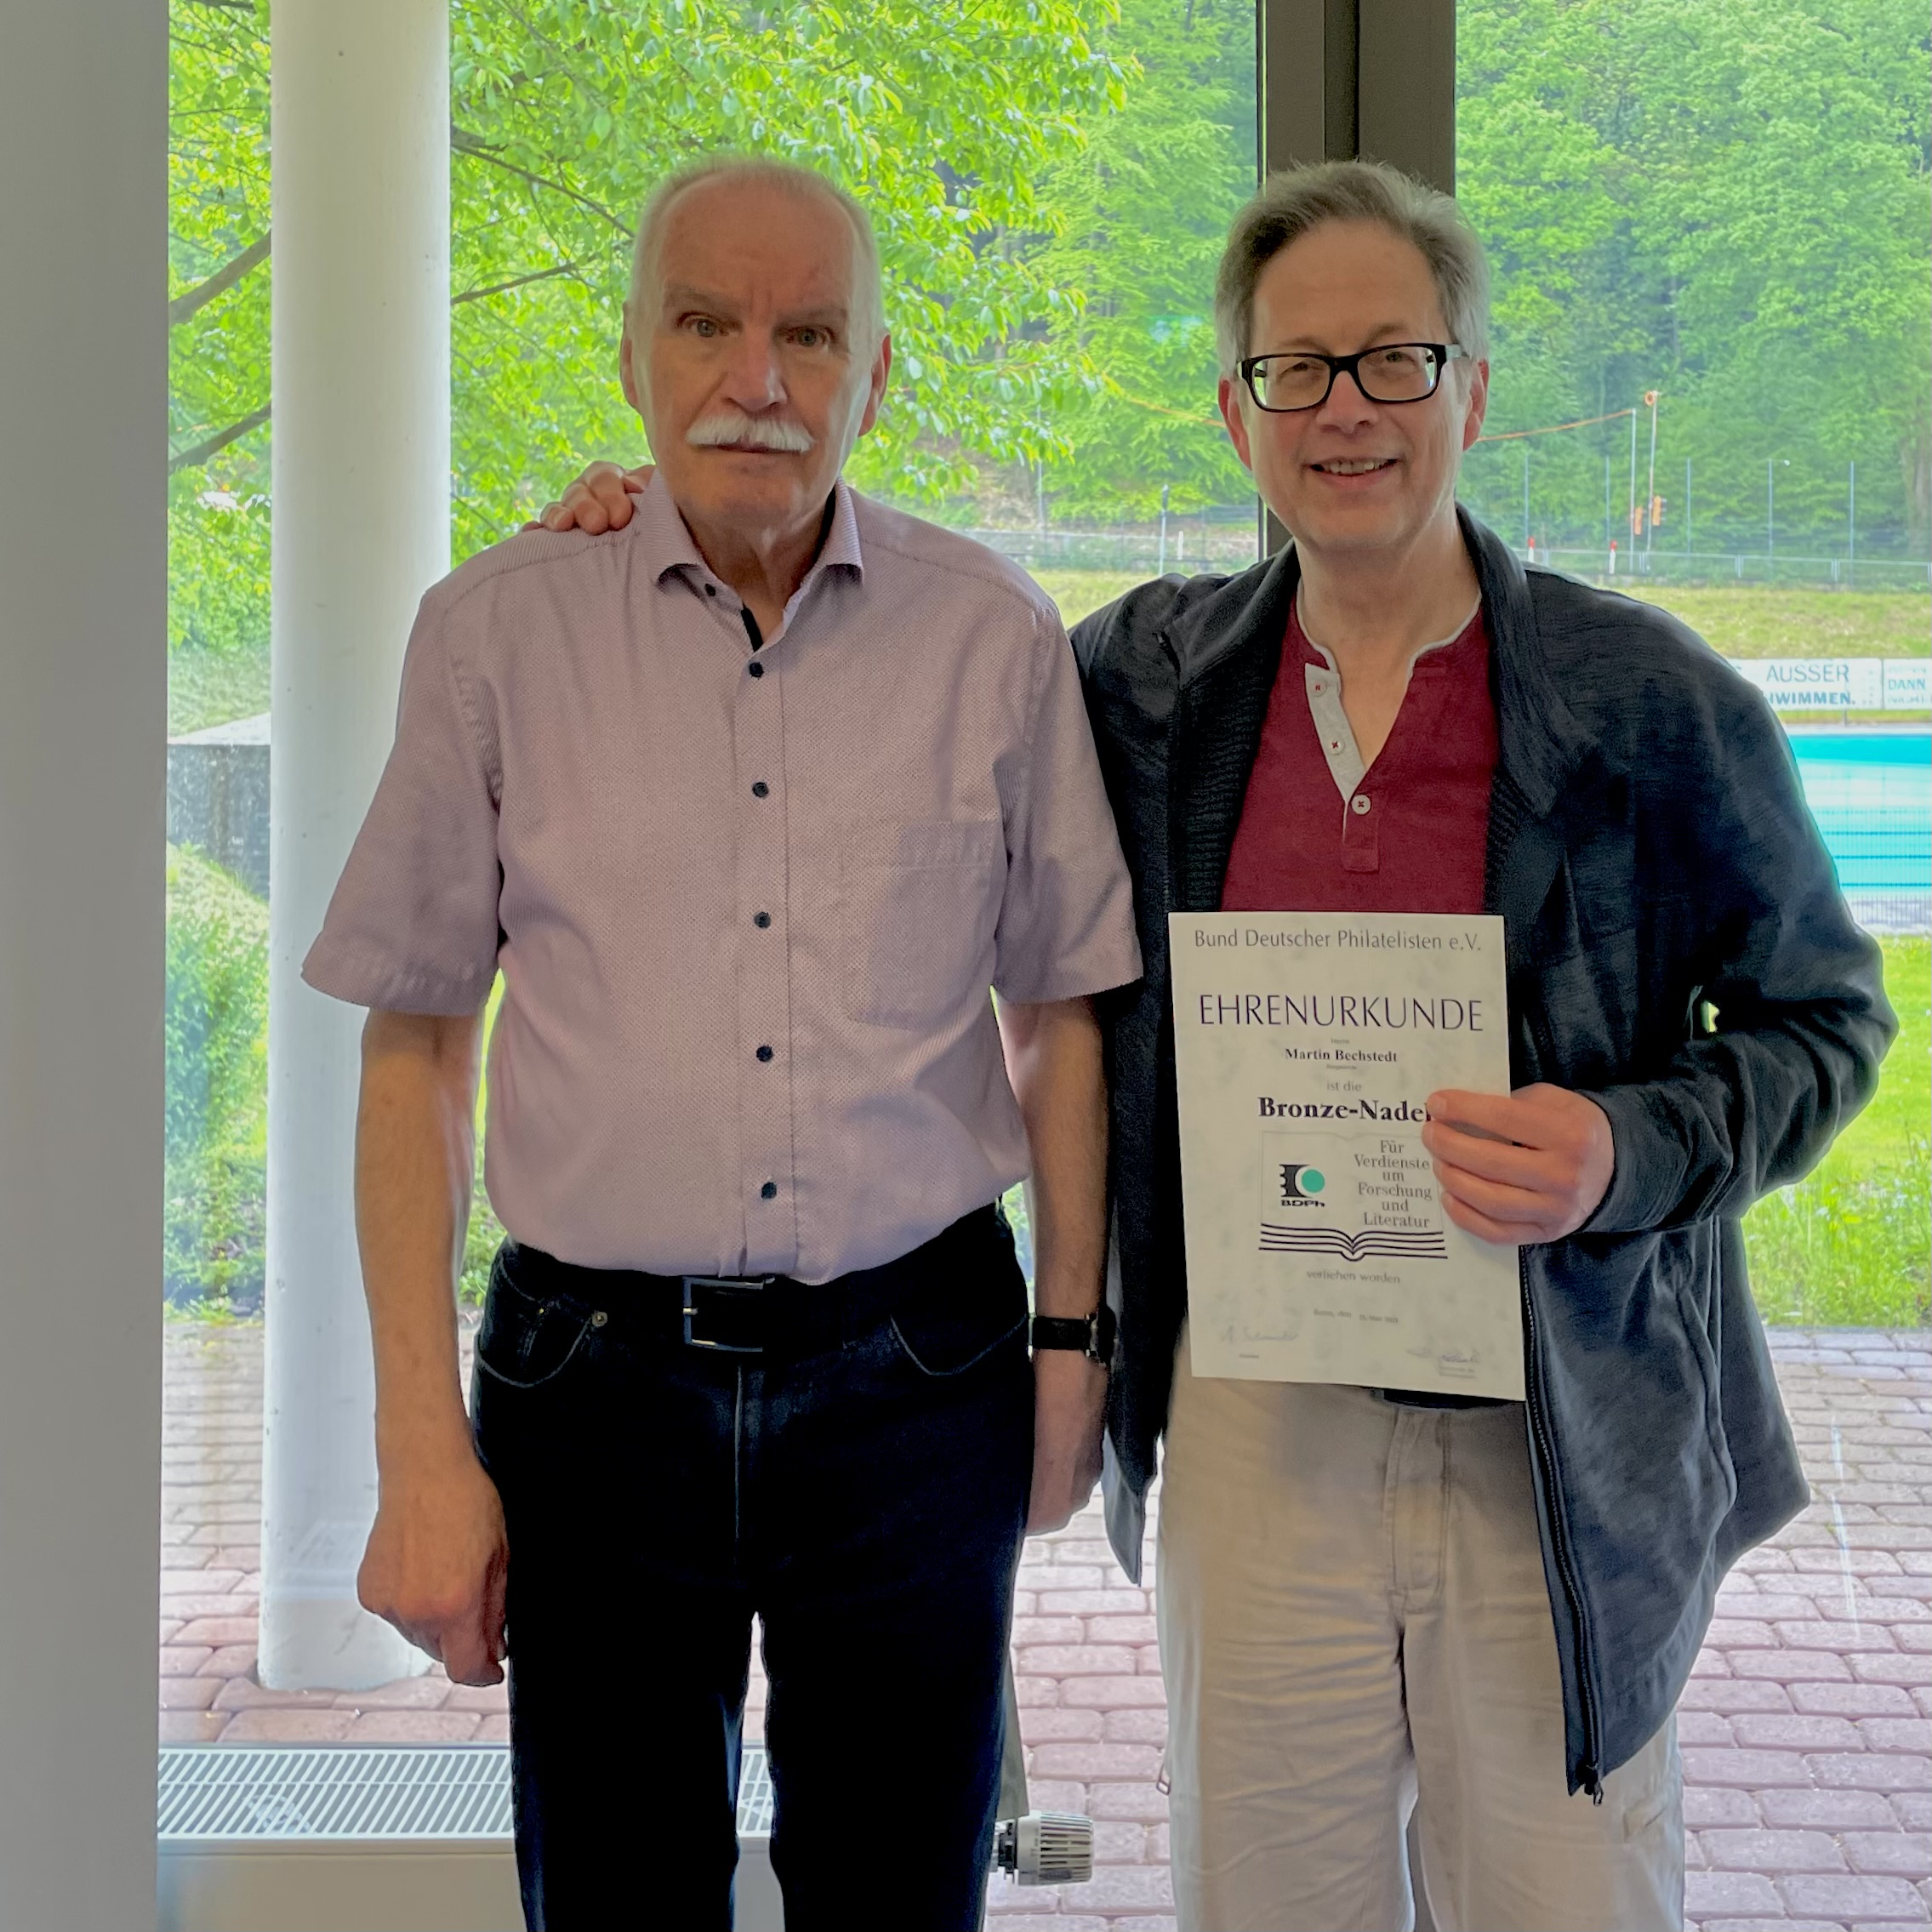 Lithuanian philatelists Bernhard 'Tony' Fels and Martin Bechstedt honoured by the BDPh